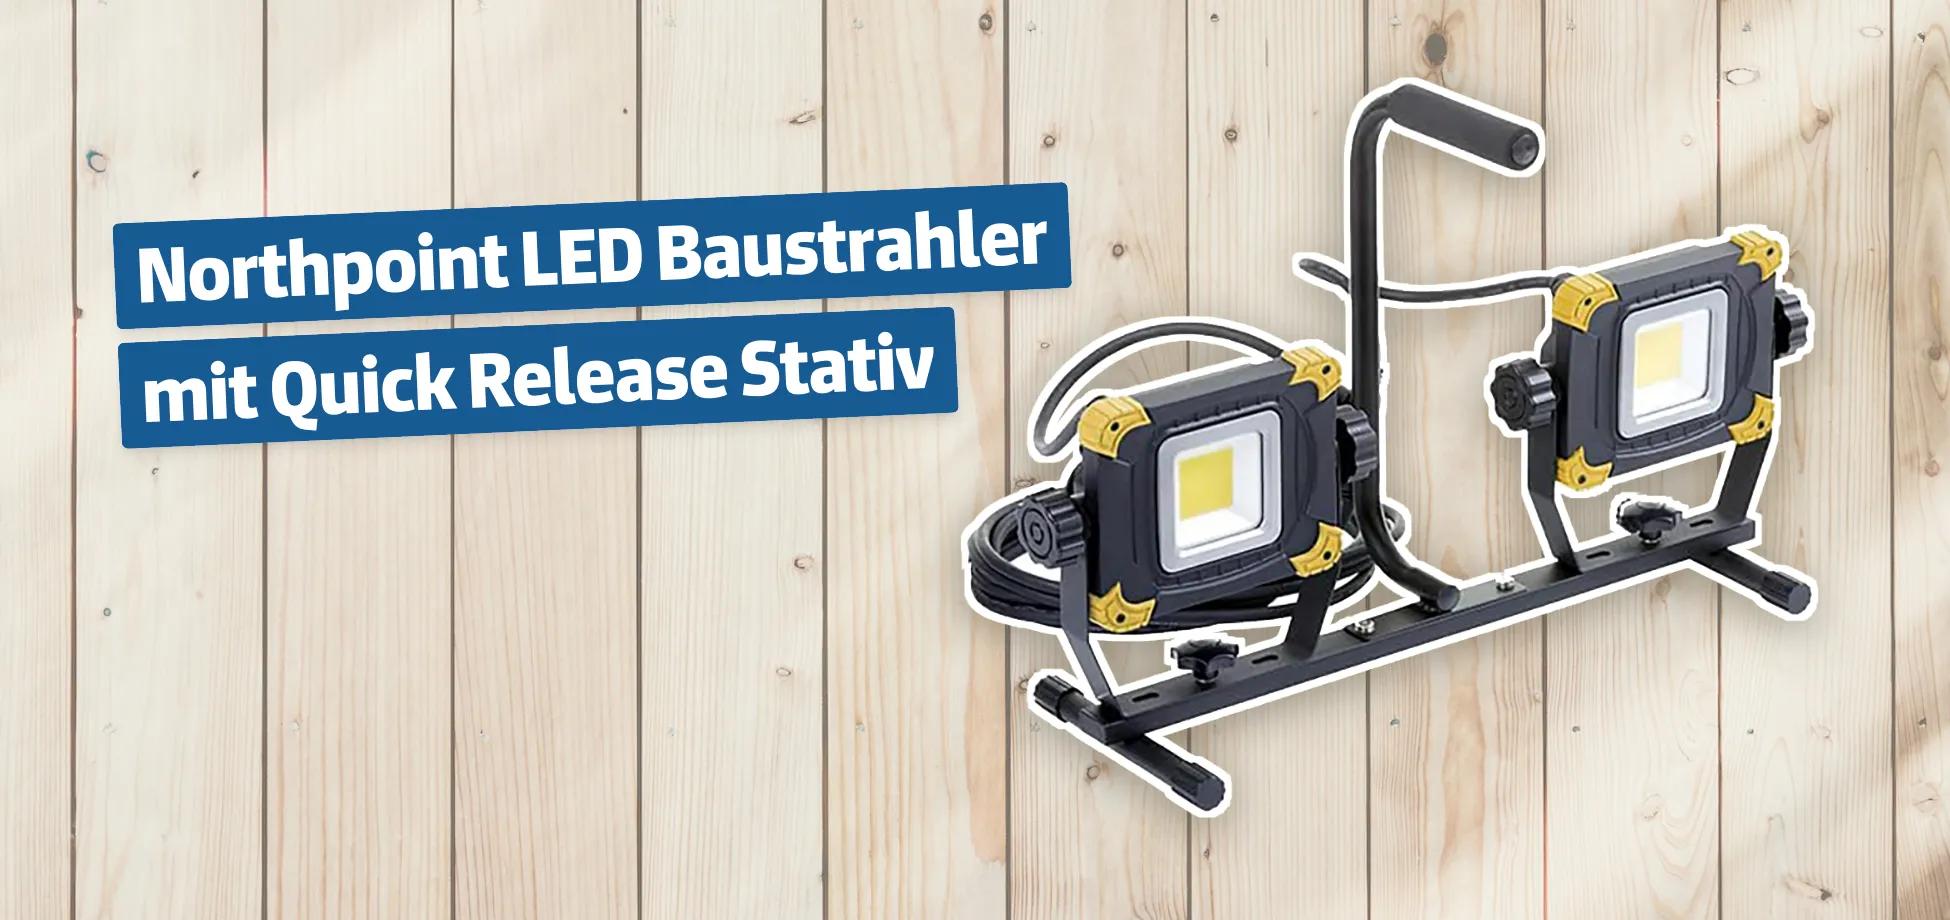 Northpoint LED Baustrahler mit Quick Release Stativ